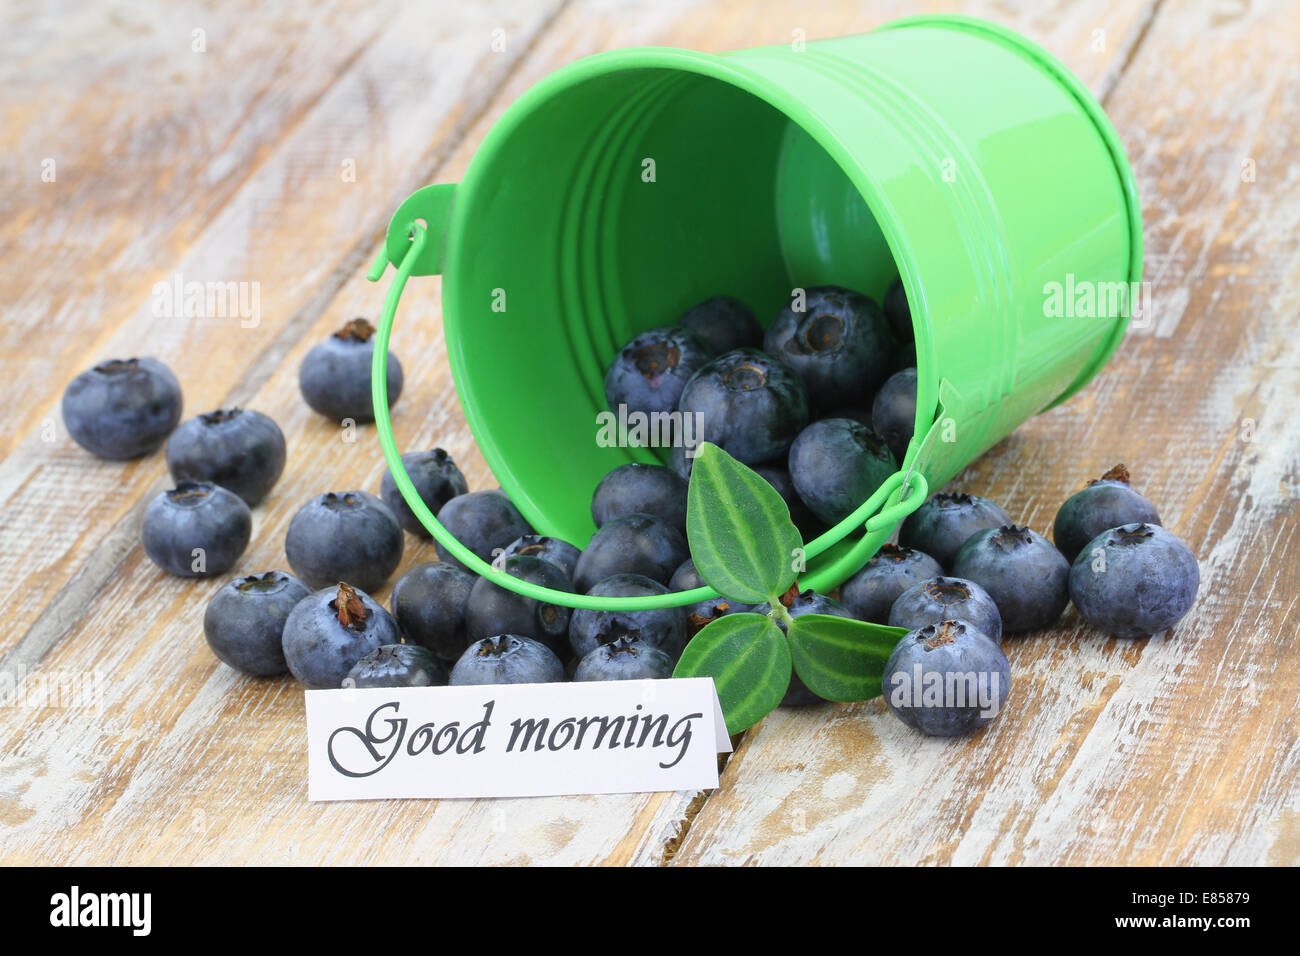 Good morning card with blueberries scattered out of green bucket Stock Photo